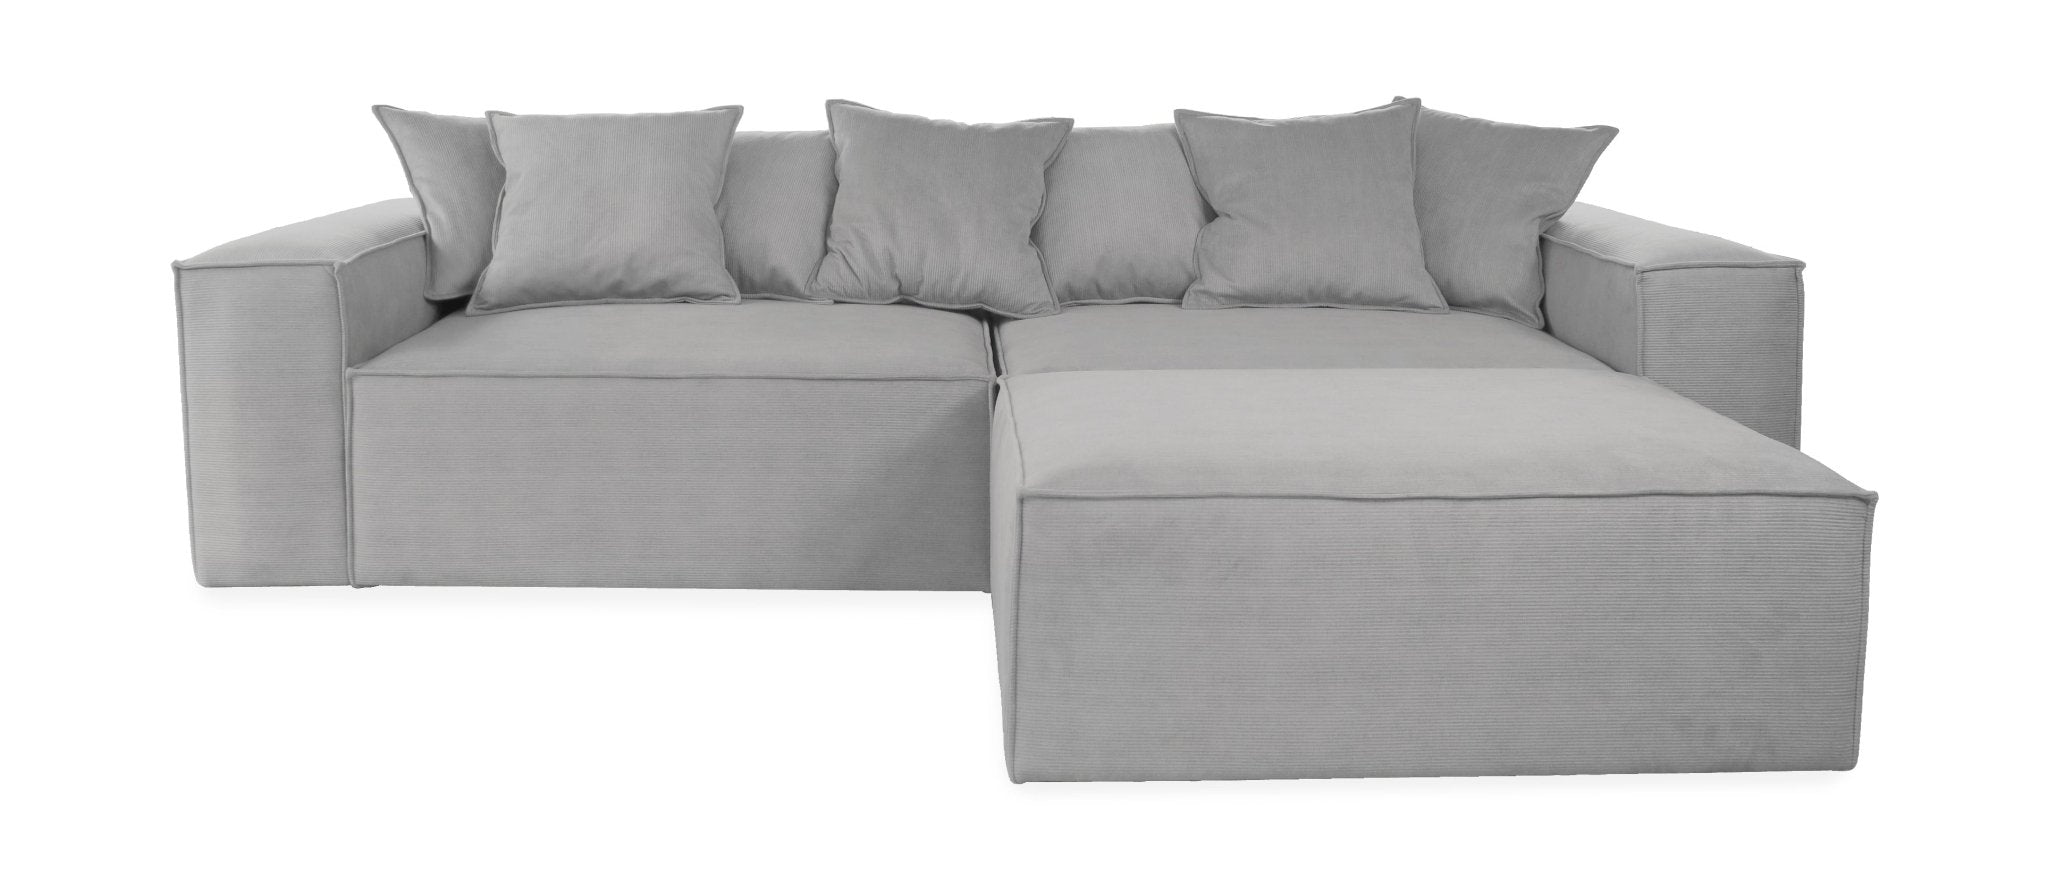 ASTRID L-shaped Sofa, exclusive Corduroy, Concrete removable & washable covers - Scandinavian Stories by Marton